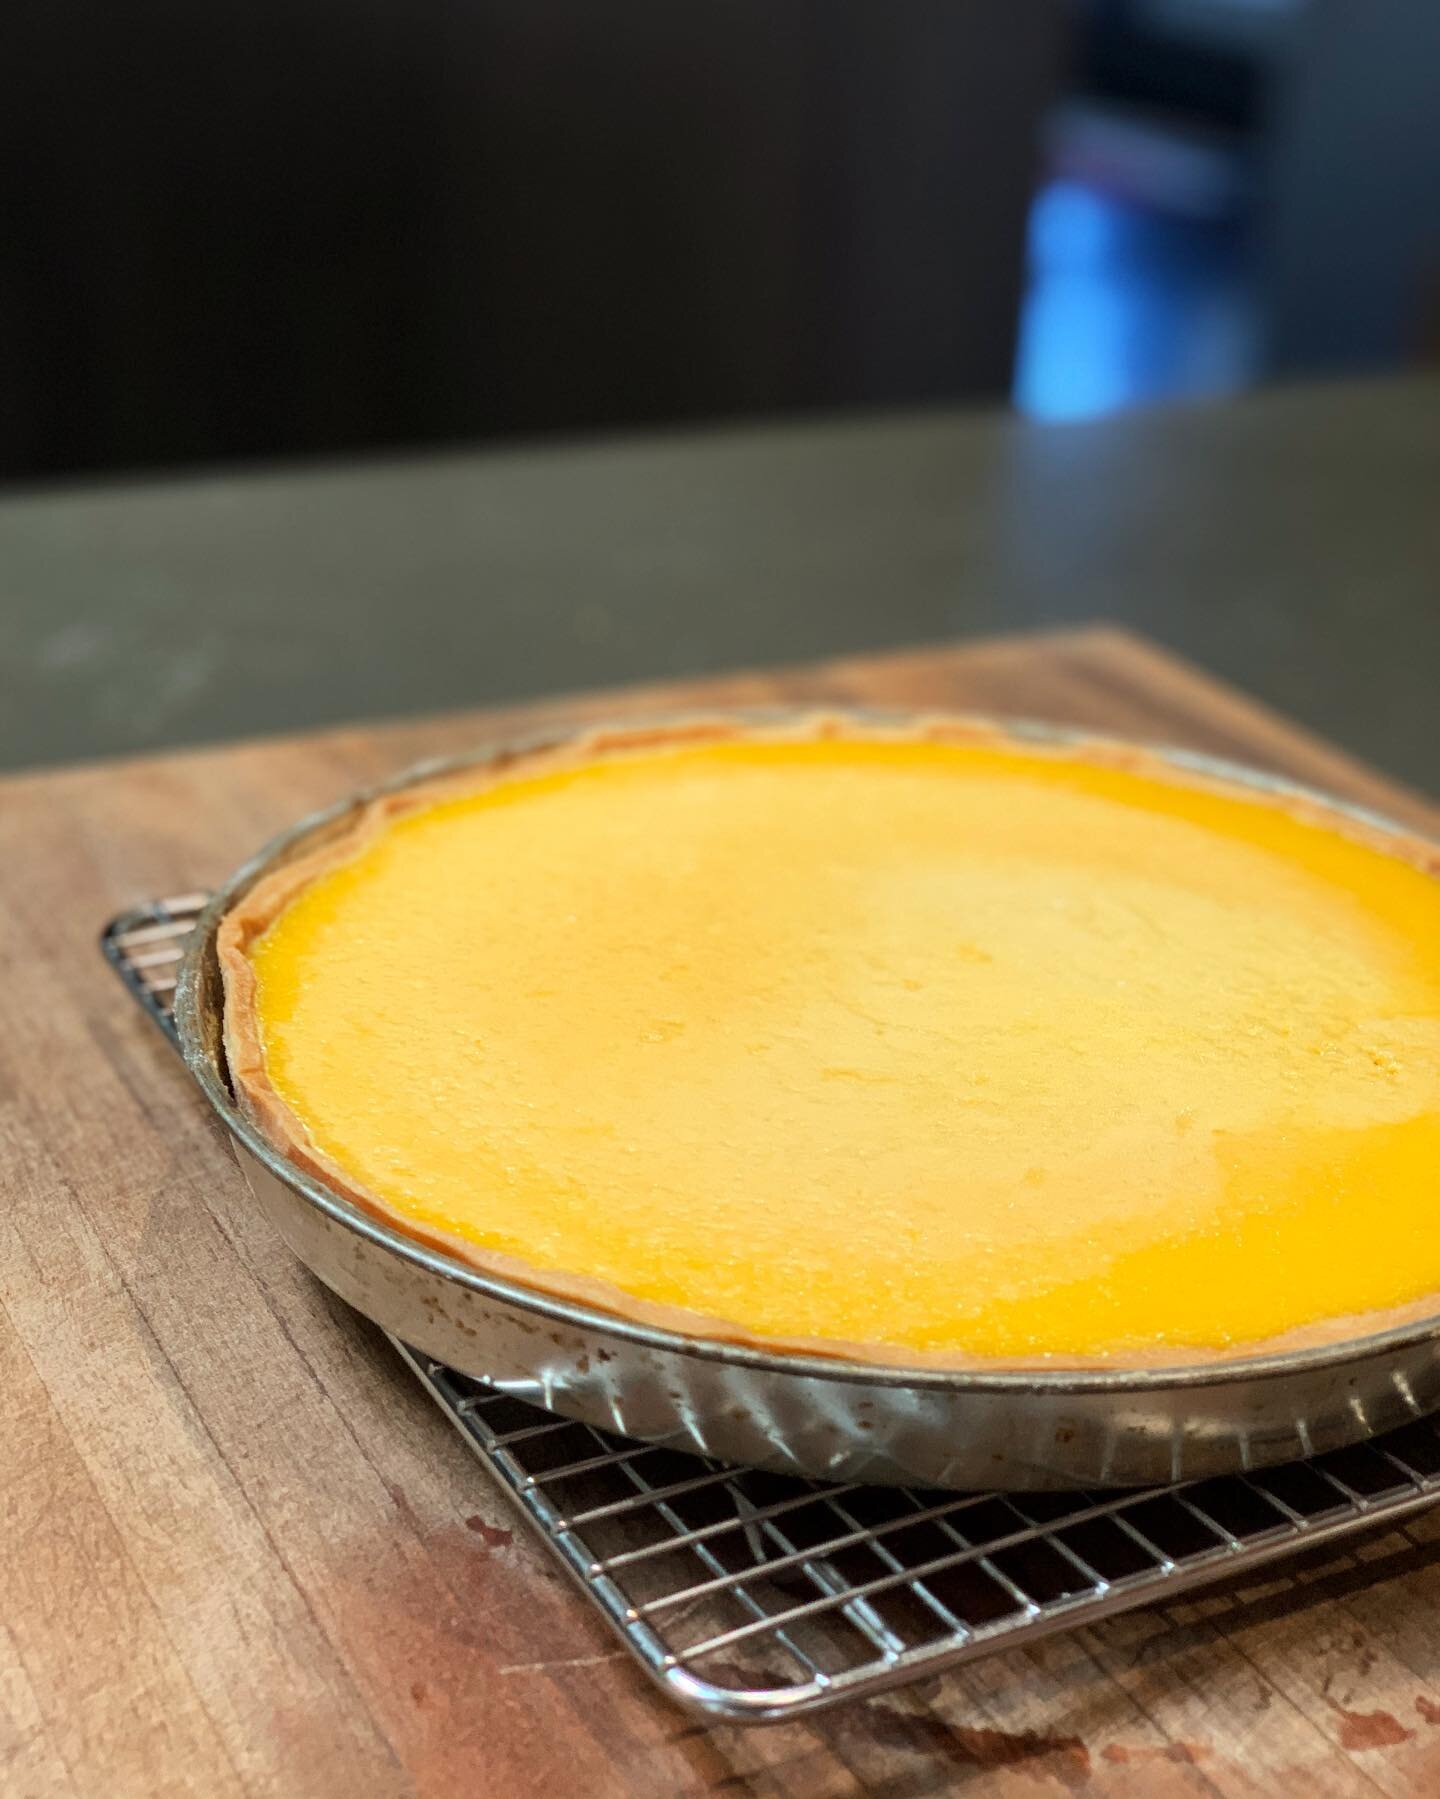 Passion fruit tart straight from the oven. This was tart was on my first ever menu from my first ever head chefs job too long ago now to remember. Brought back last night for a small function in Sydney still as delicious as ever.
,
.
.
#dessert #tart